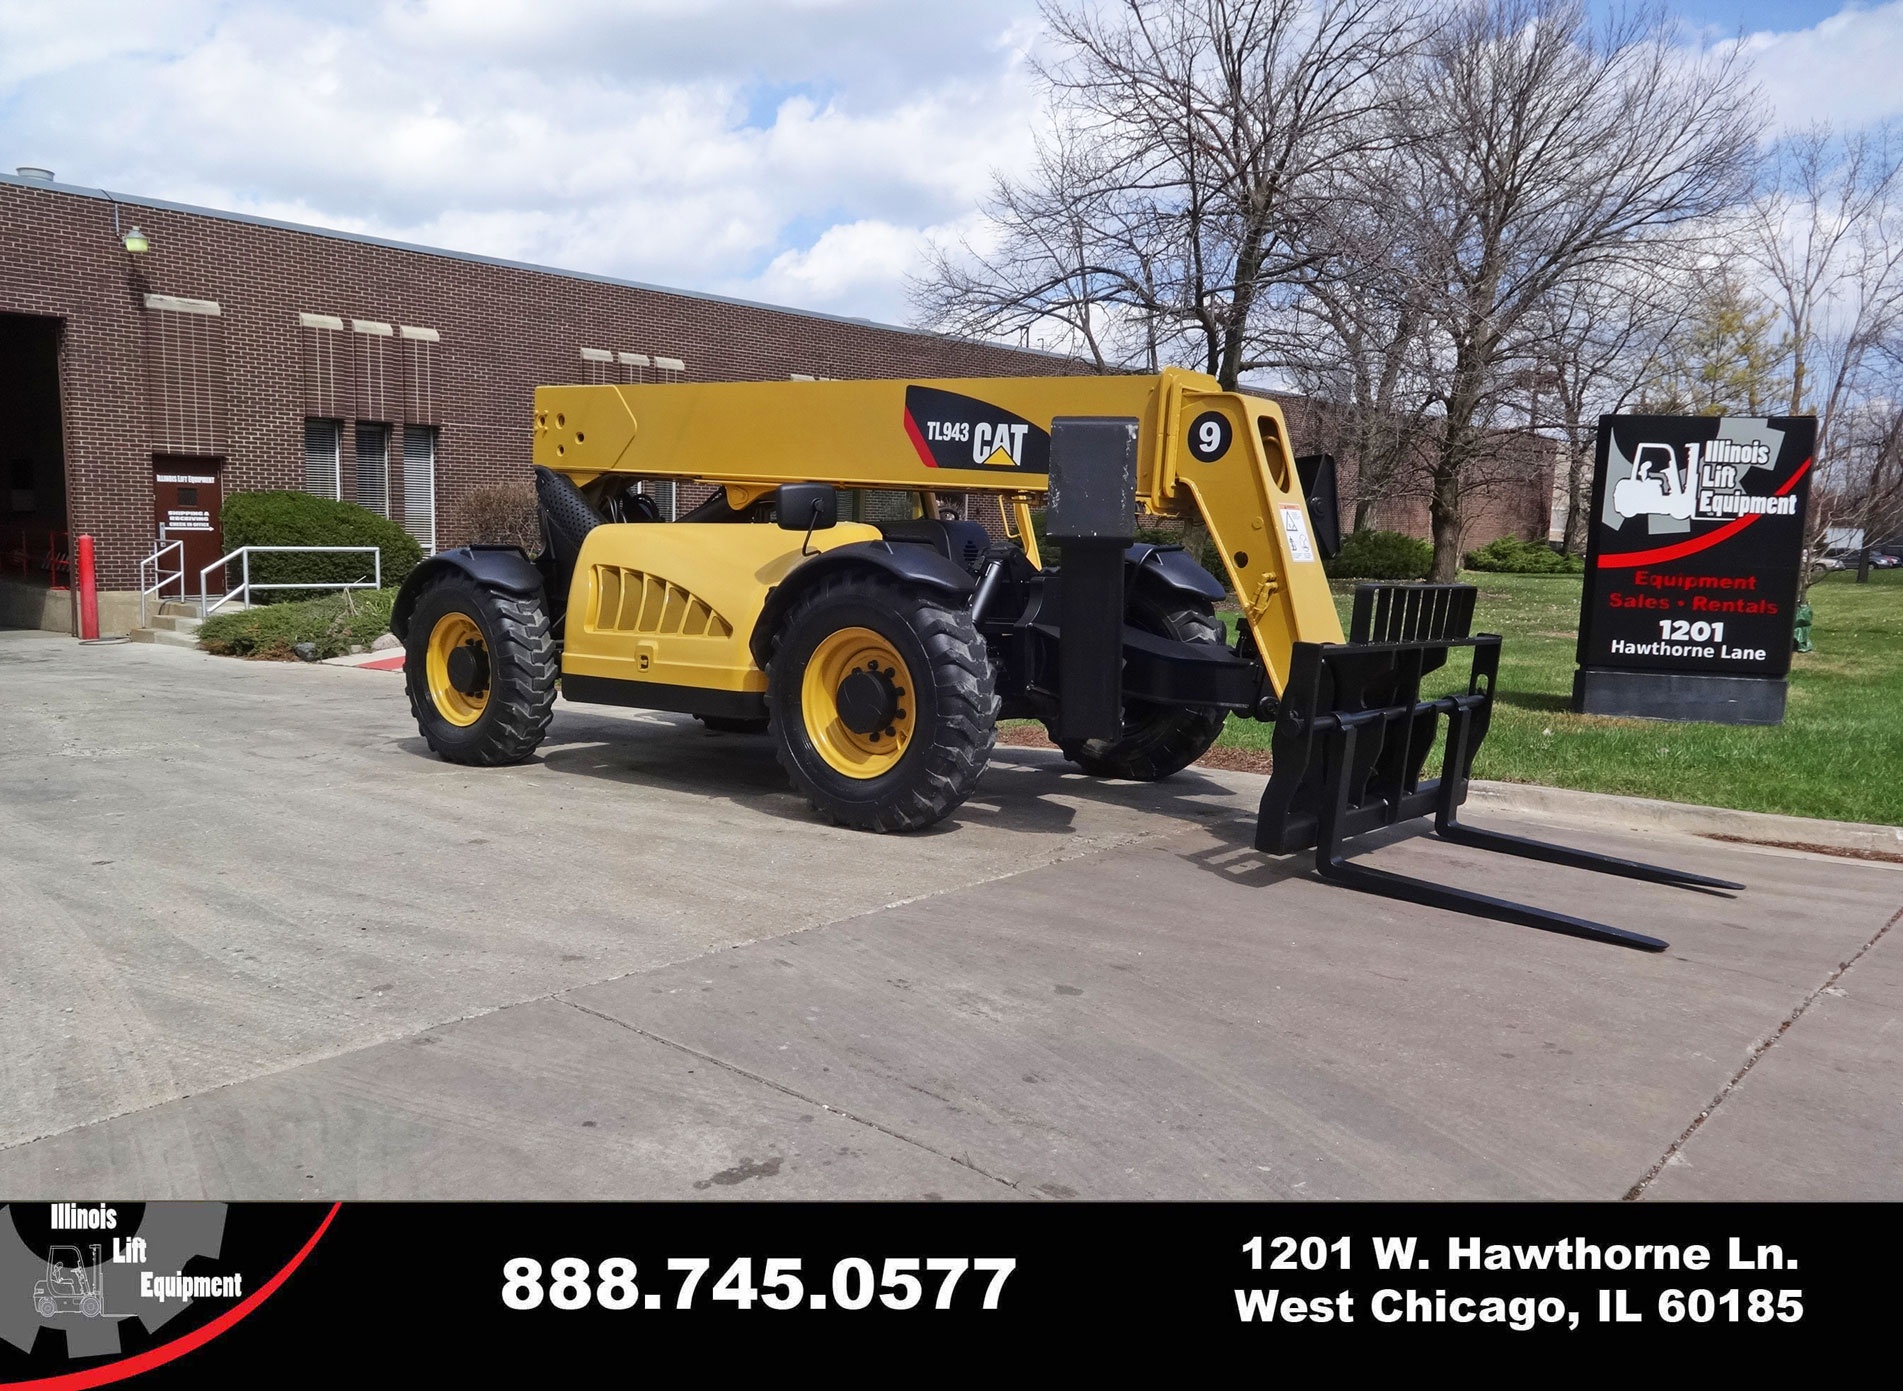 Used 2008 CATERPILLAR TL943  | Cary, IL